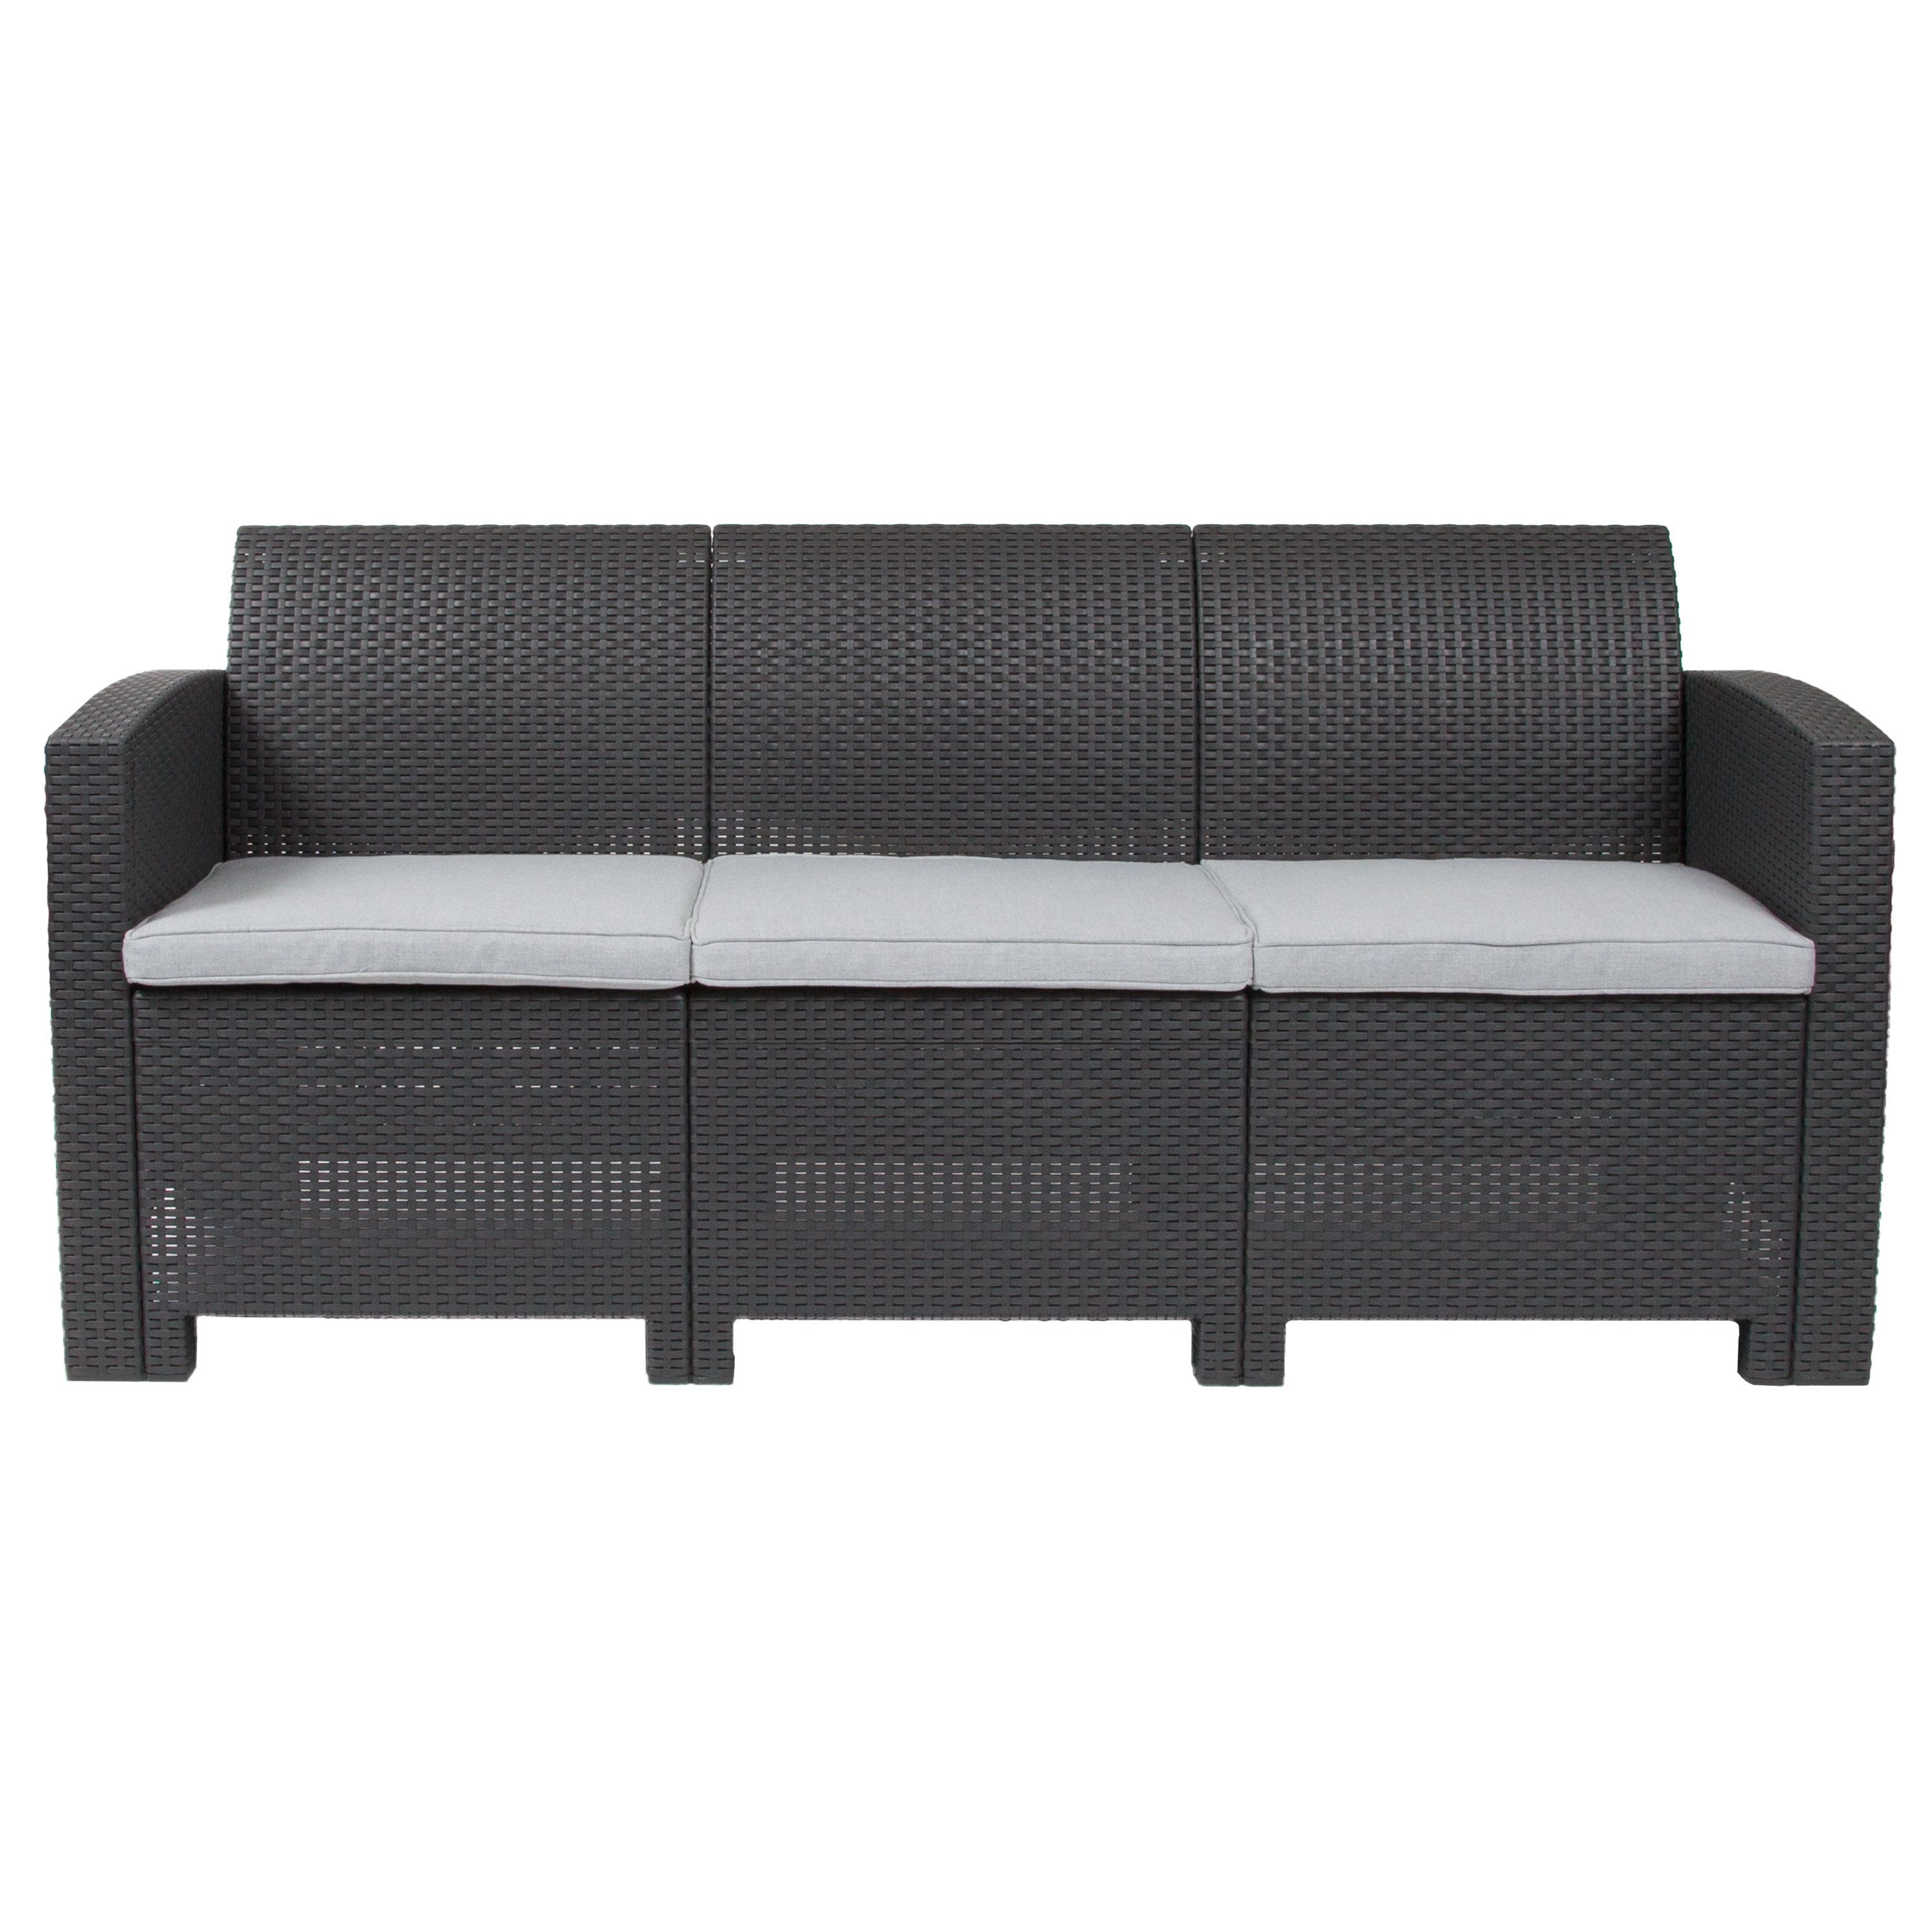 Most Up To Date Stockwell Patio Sofa With Cushions Regarding Yoselin Patio Sofas With Cushions (View 4 of 20)